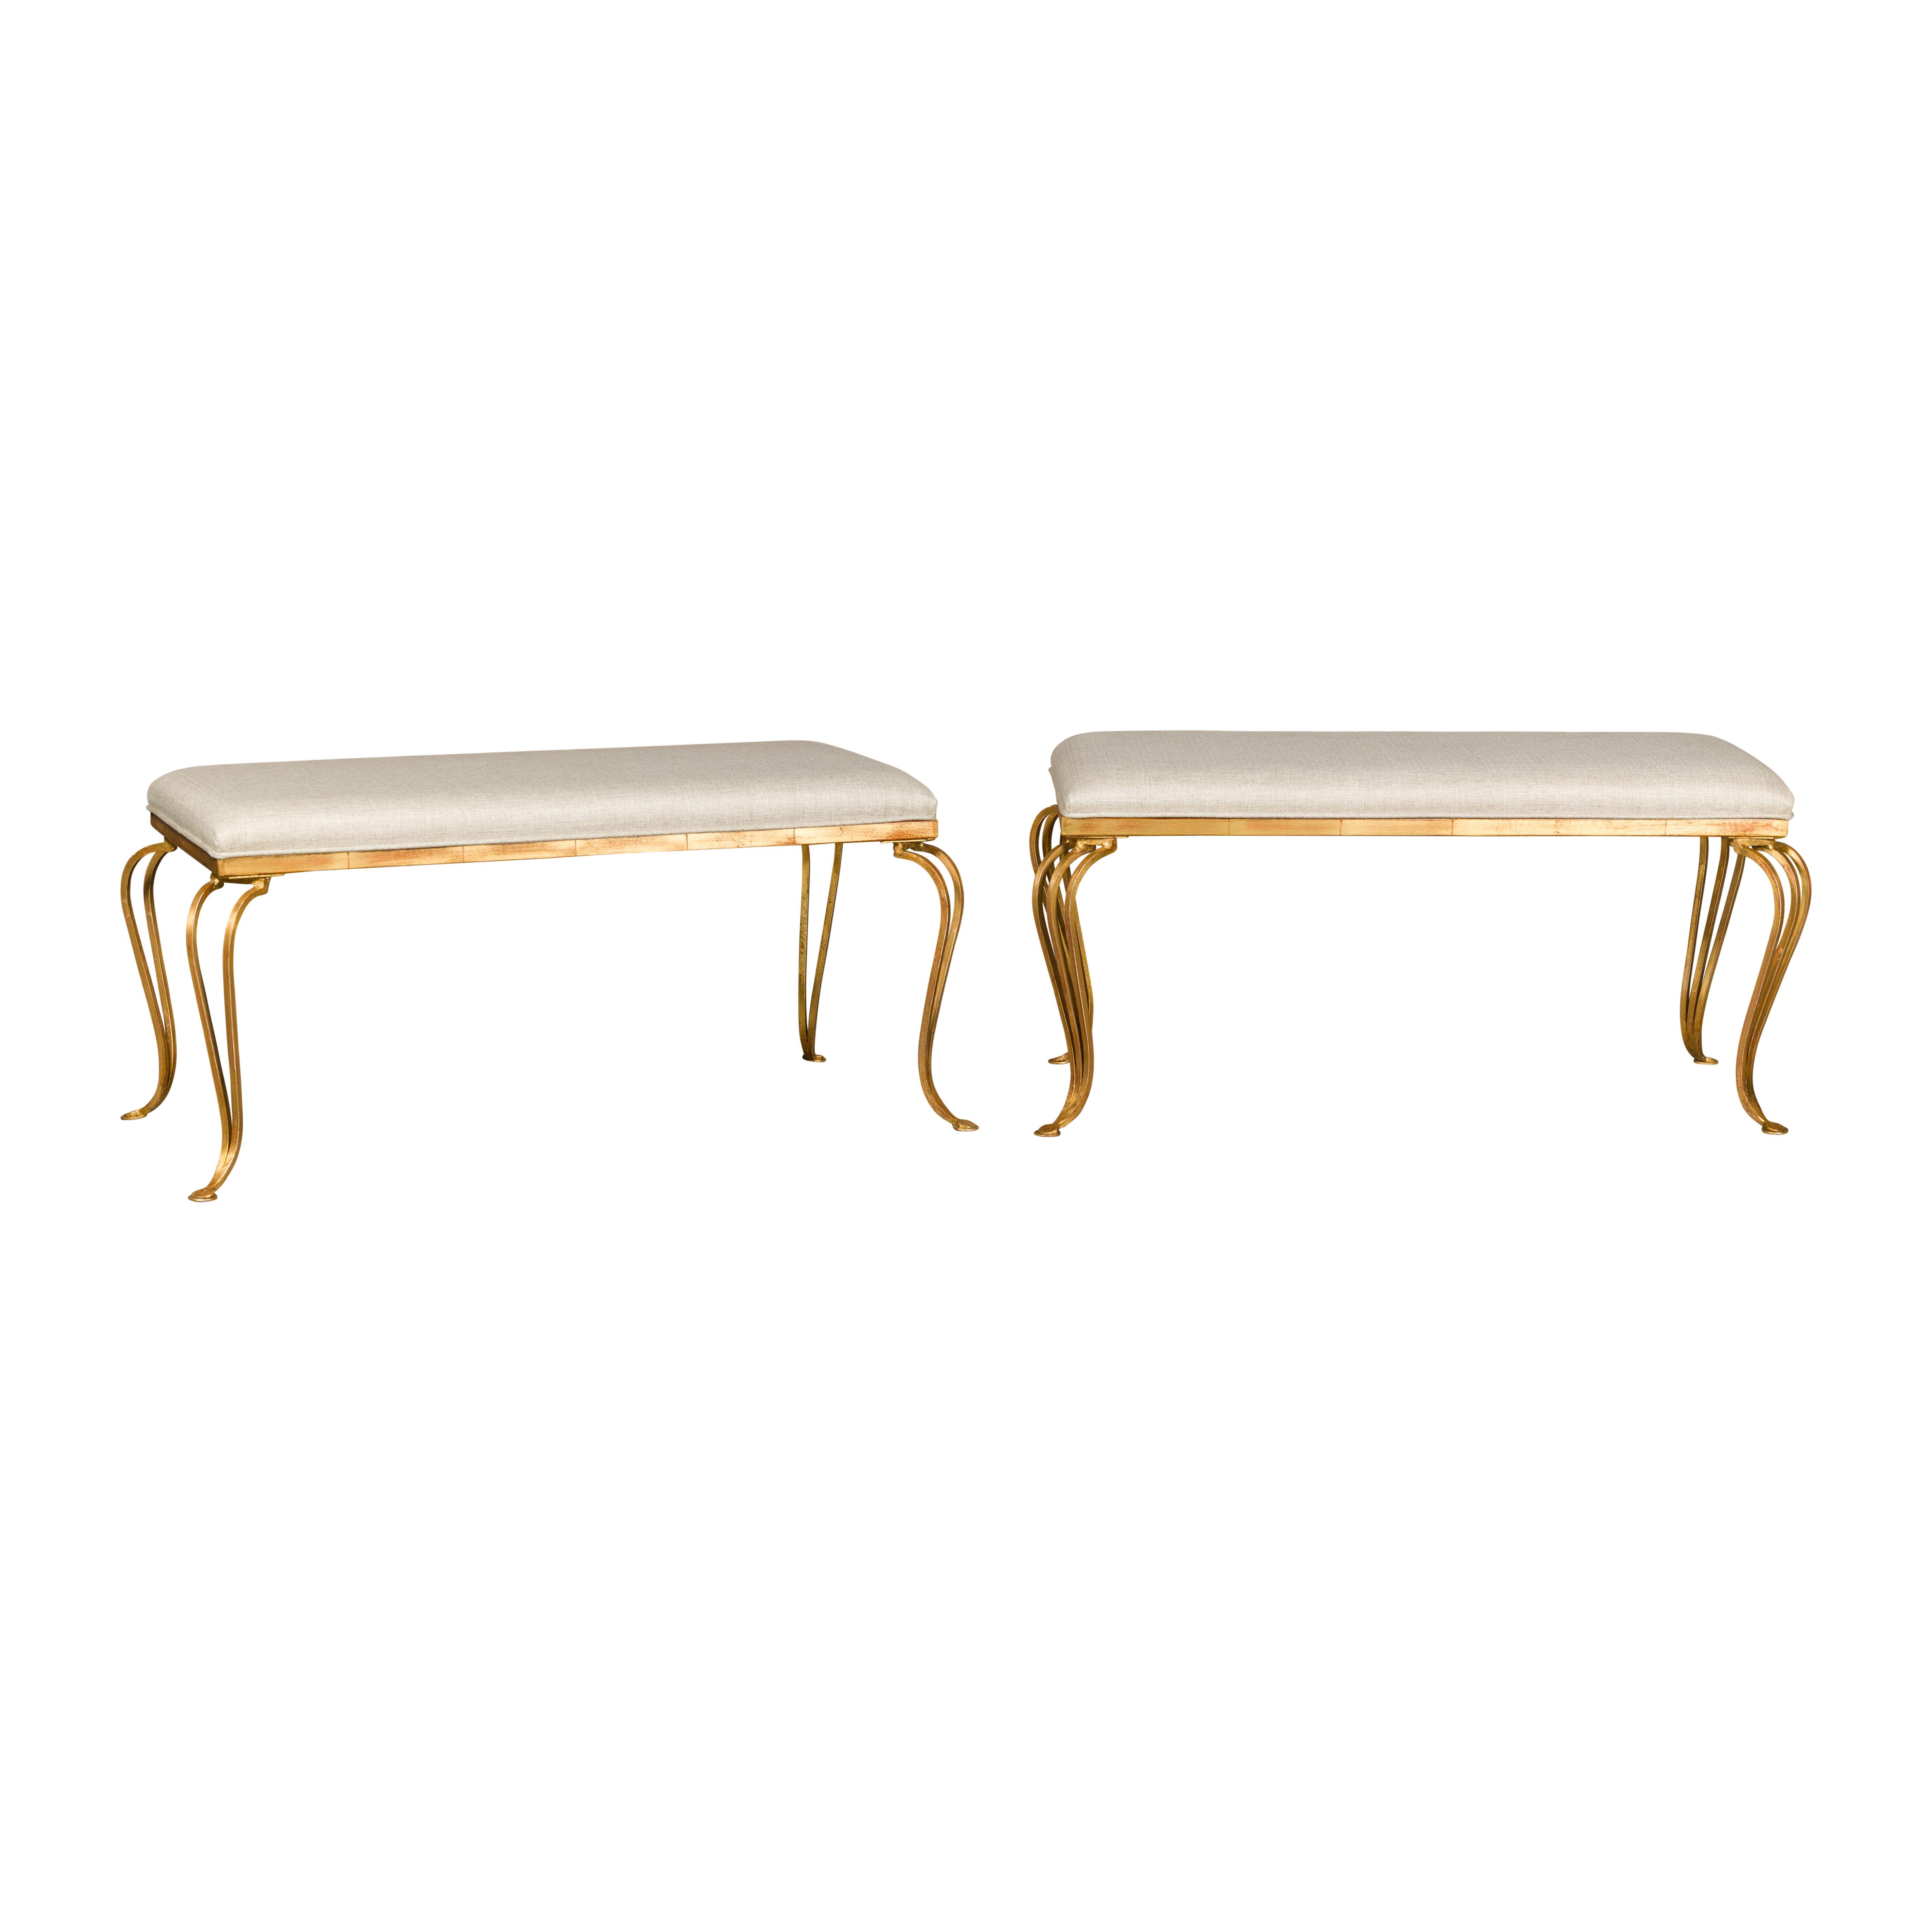 Midcentury French Gilt Metal Benches with Cabriole Legs and Upholstery, a Pair For Sale 10